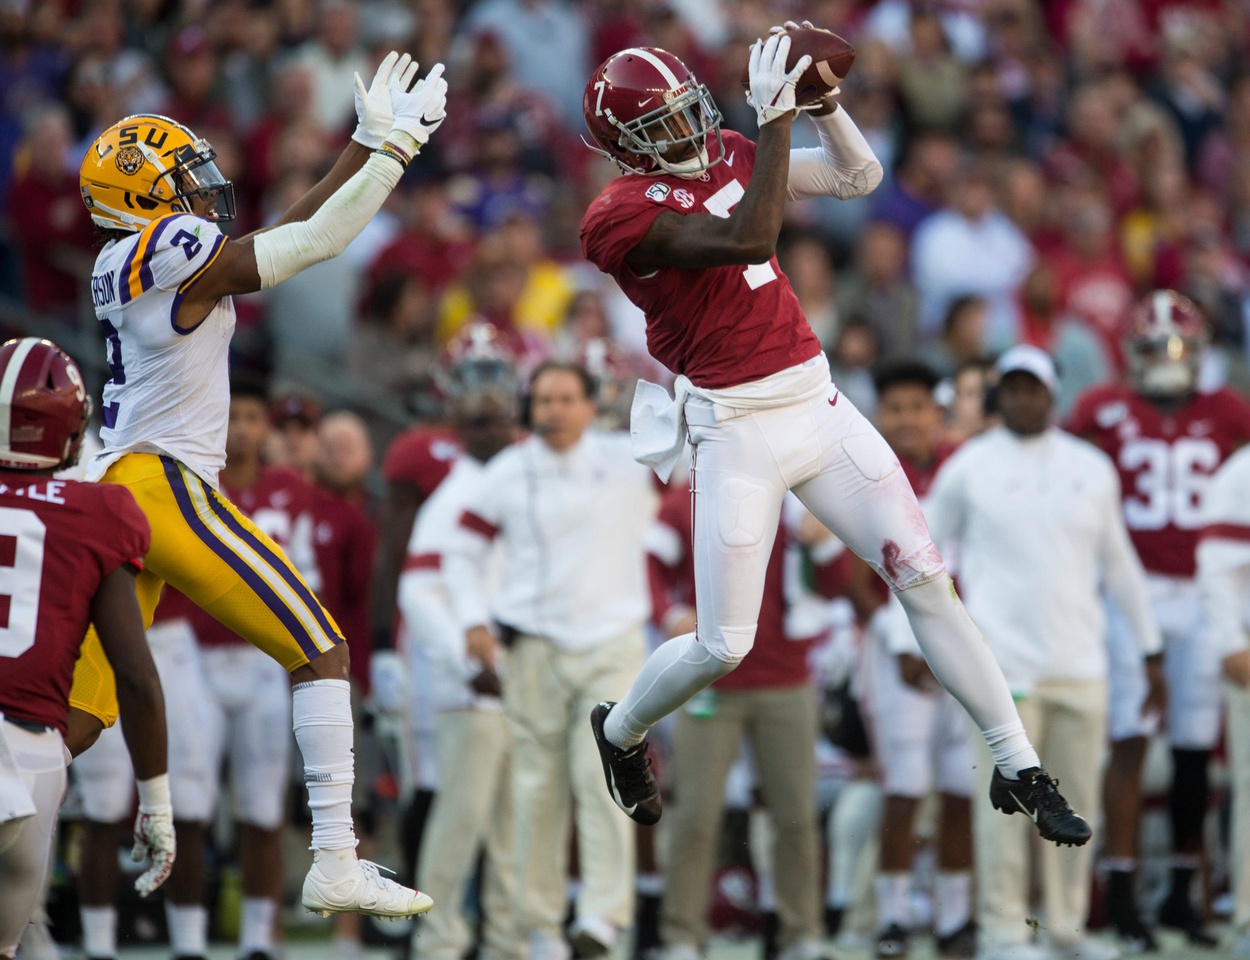 Latest NFL Mock Draft has 7 Alabama players drafted in first round